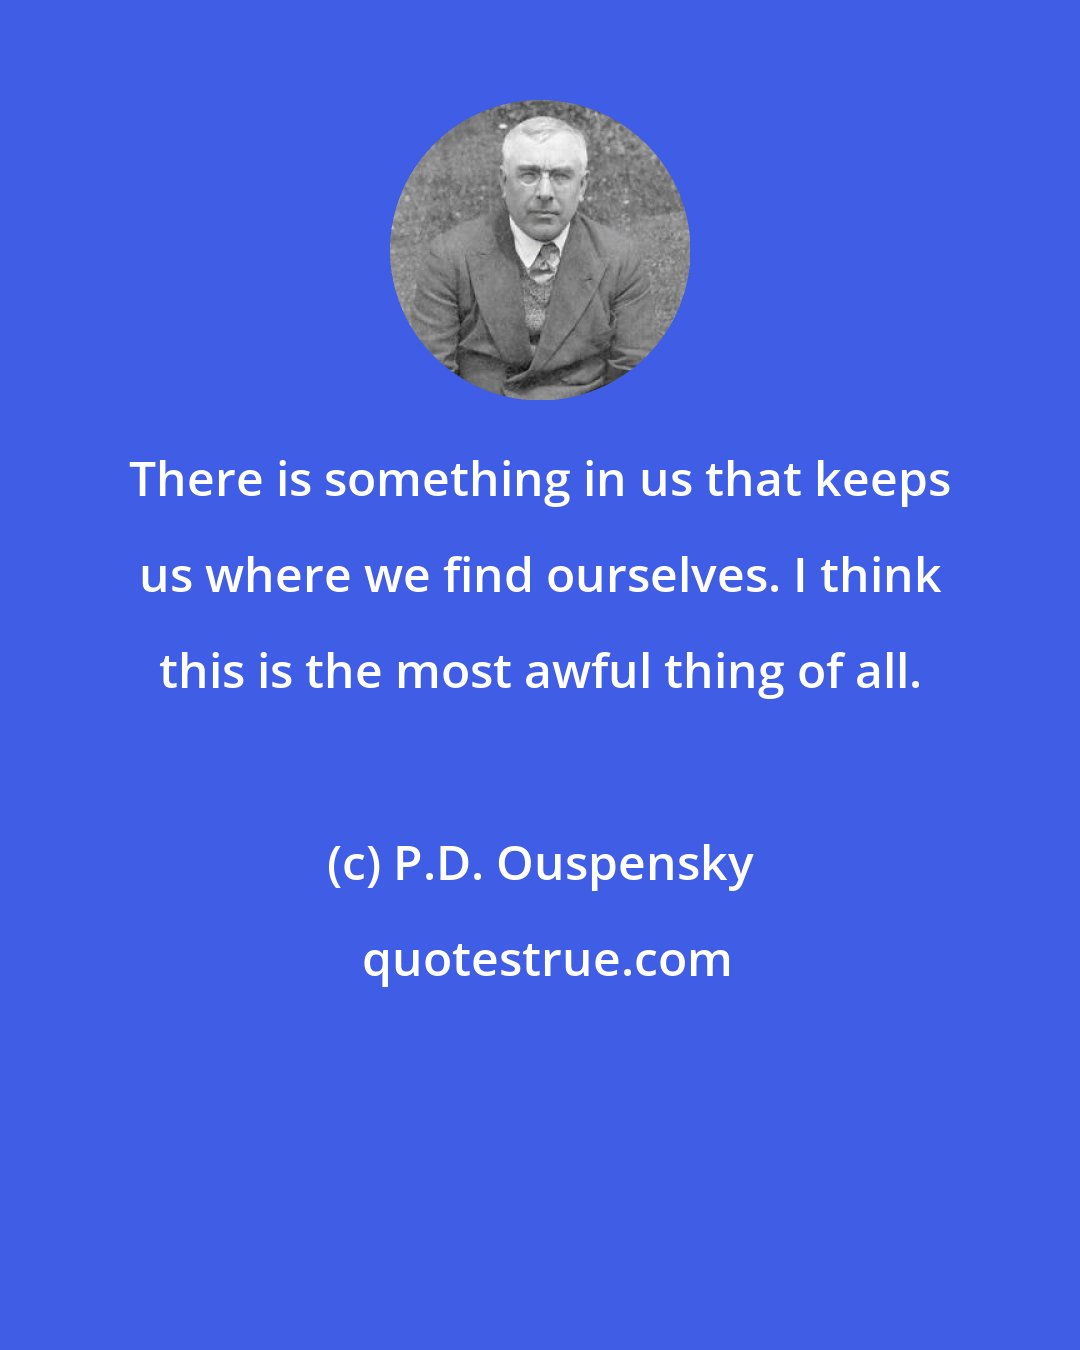 P.D. Ouspensky: There is something in us that keeps us where we find ourselves. I think this is the most awful thing of all.